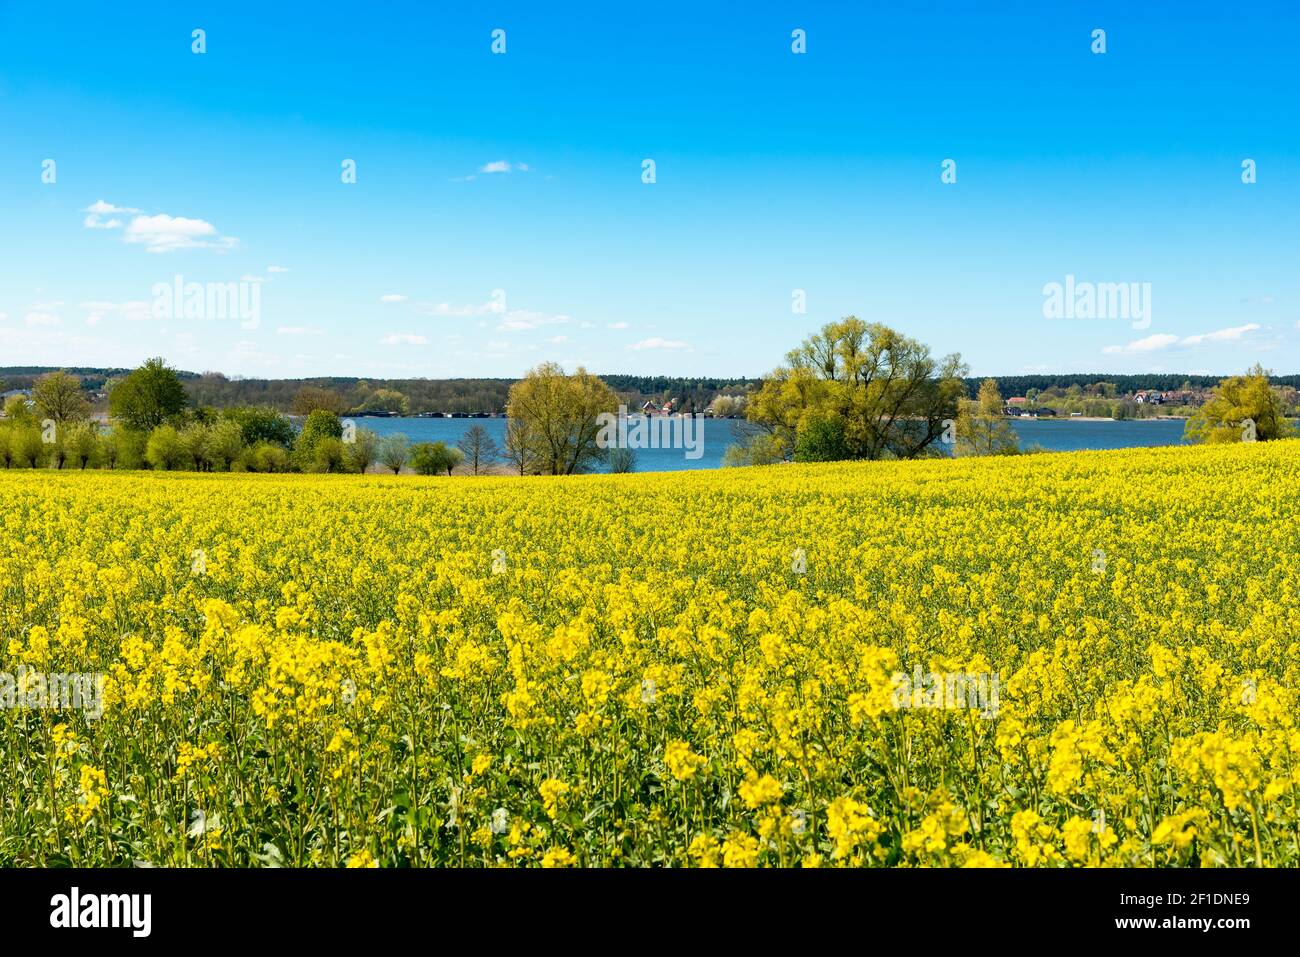 Canola fields in Mecklenburg, Germany Stock Photo